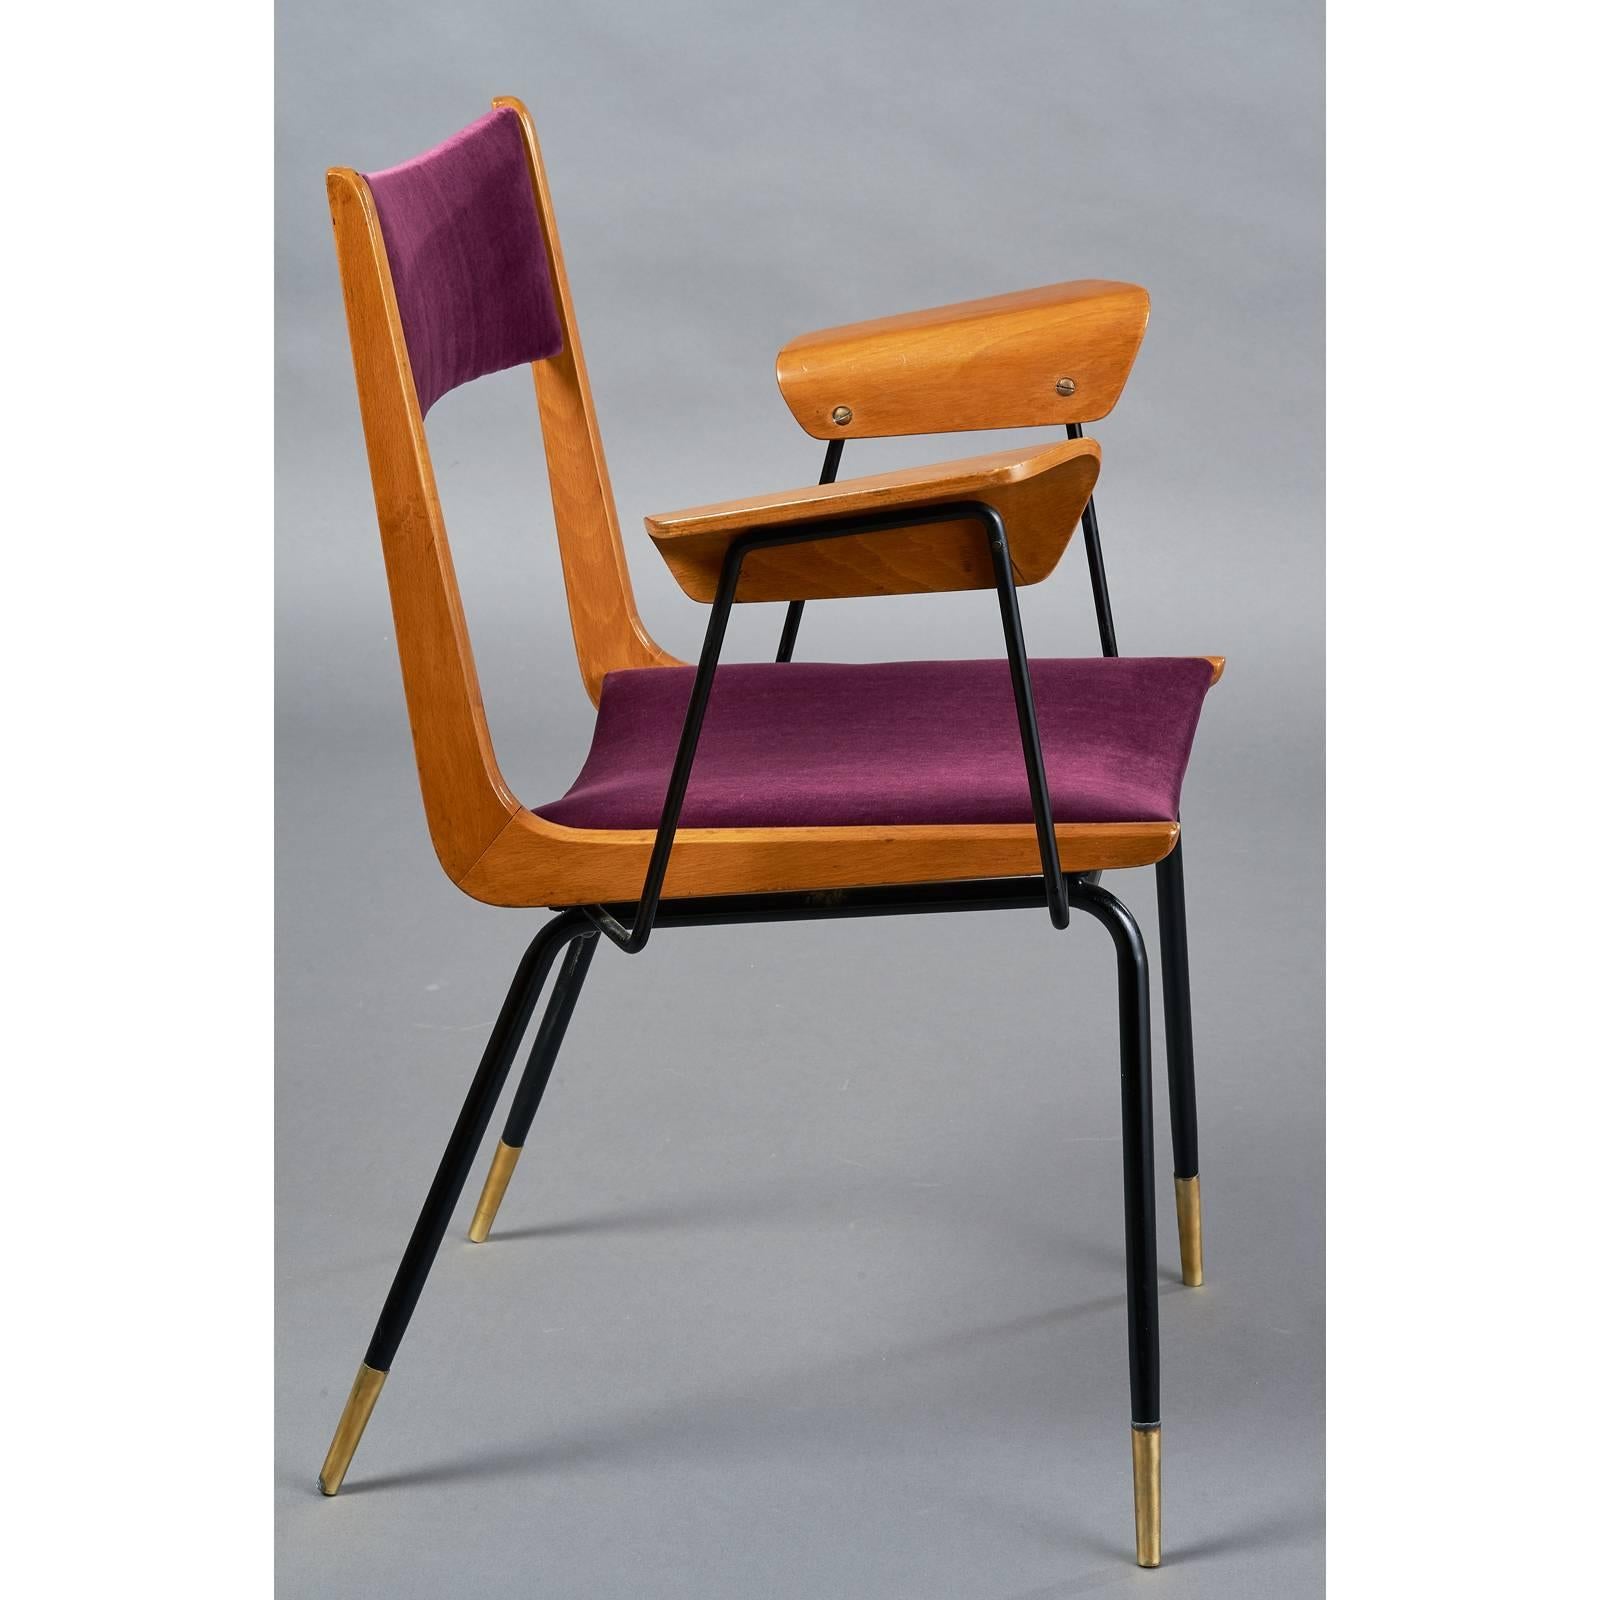 Italy, 1950s
Single desk armchair in solid and folded laminated light woods,
enameled metal legs and armature with tall brass sabots
Dimensions: 24 W x 20 D x 16 H, seat, 31 H back.